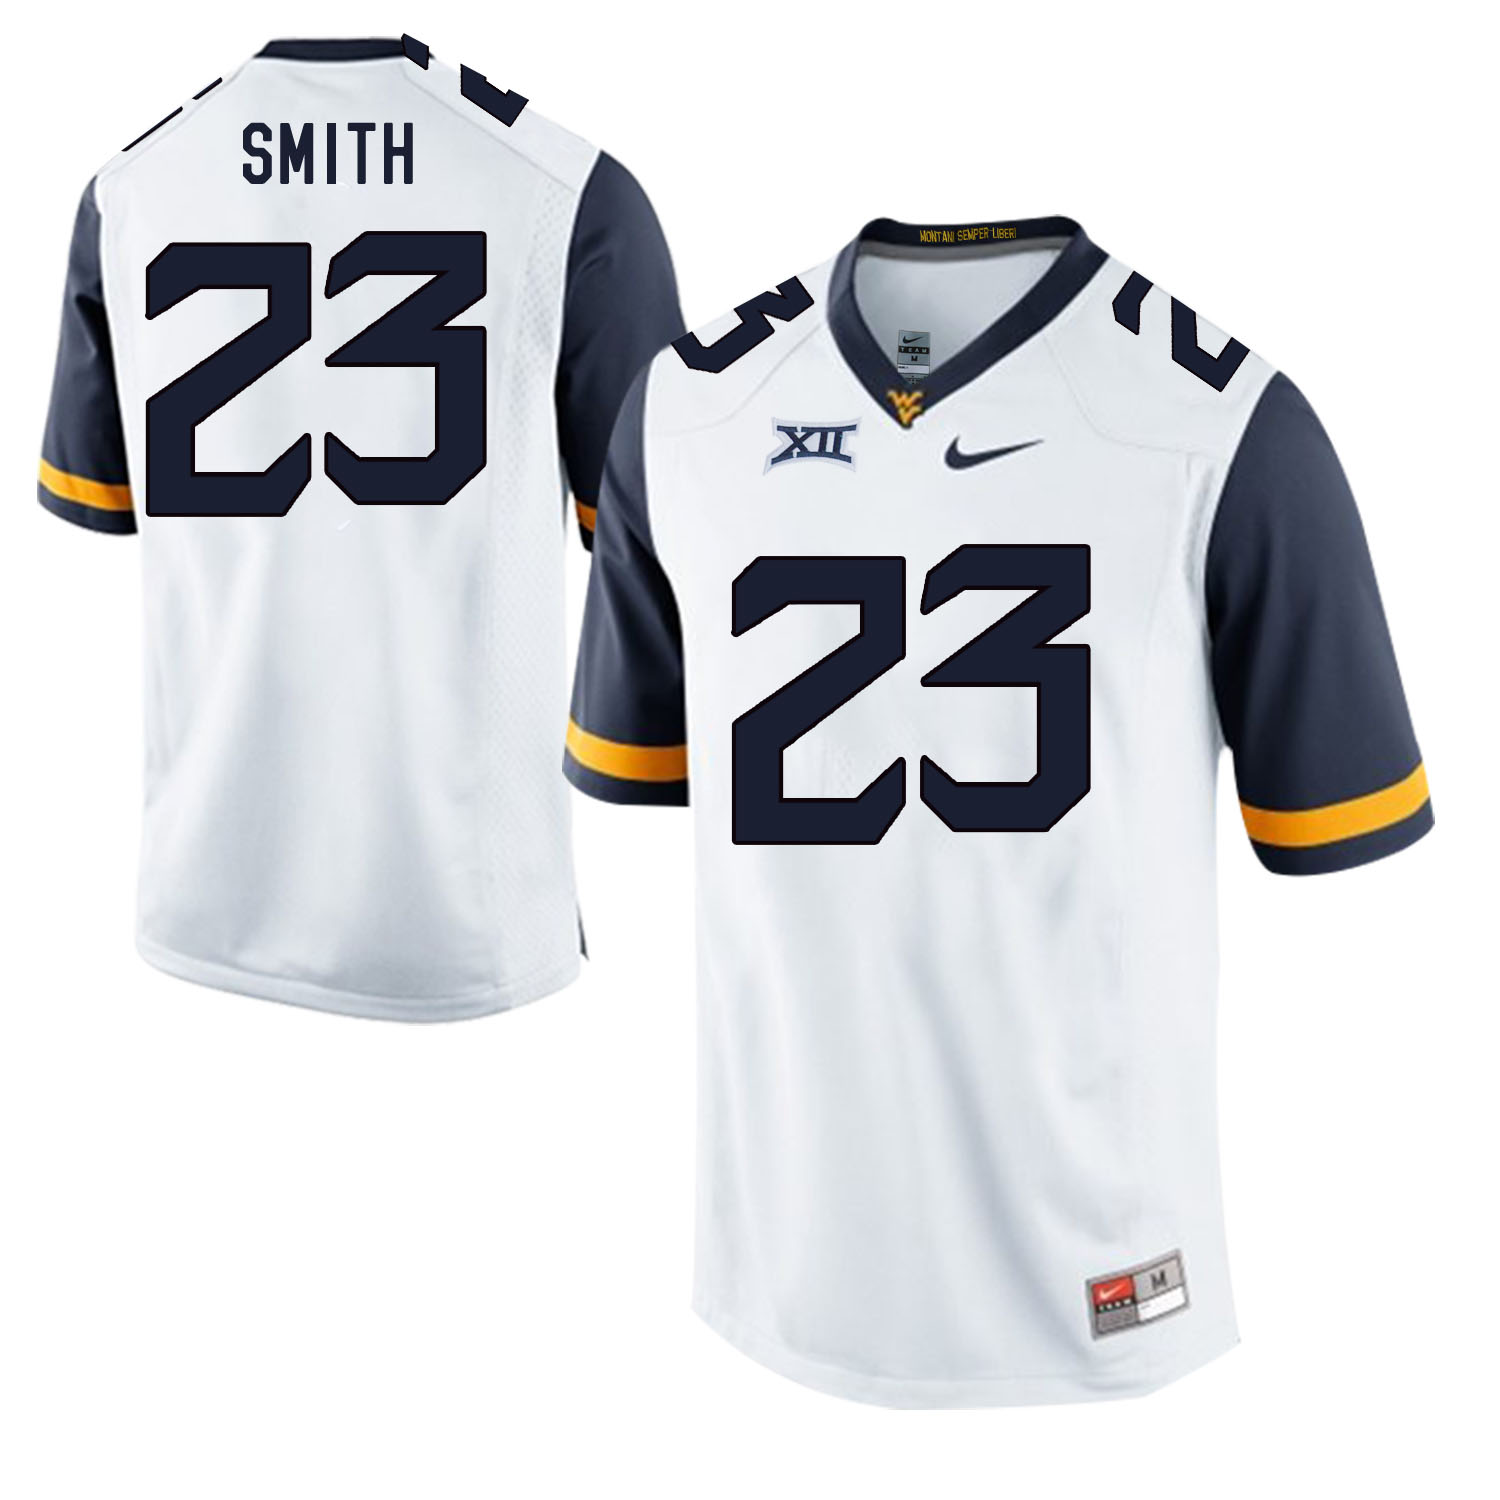 West Virginia Mountaineers 23 Geno Smith White College Football Jersey